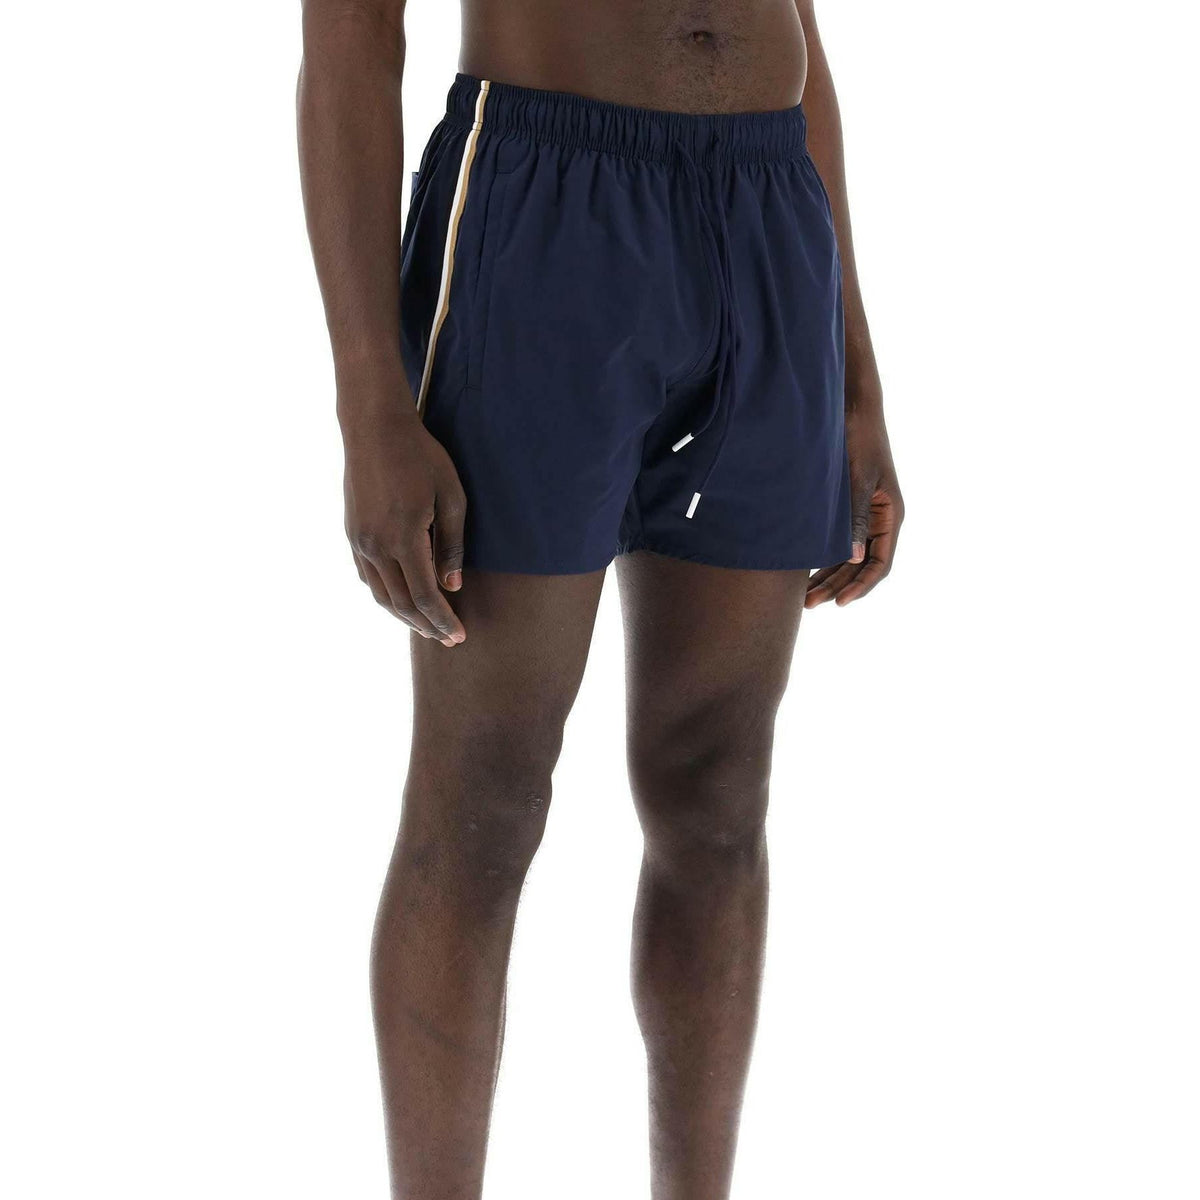 Navy Blue Technical Fabric Swim Trunks With Tricolor Side Bands BOSS JOHN JULIA.